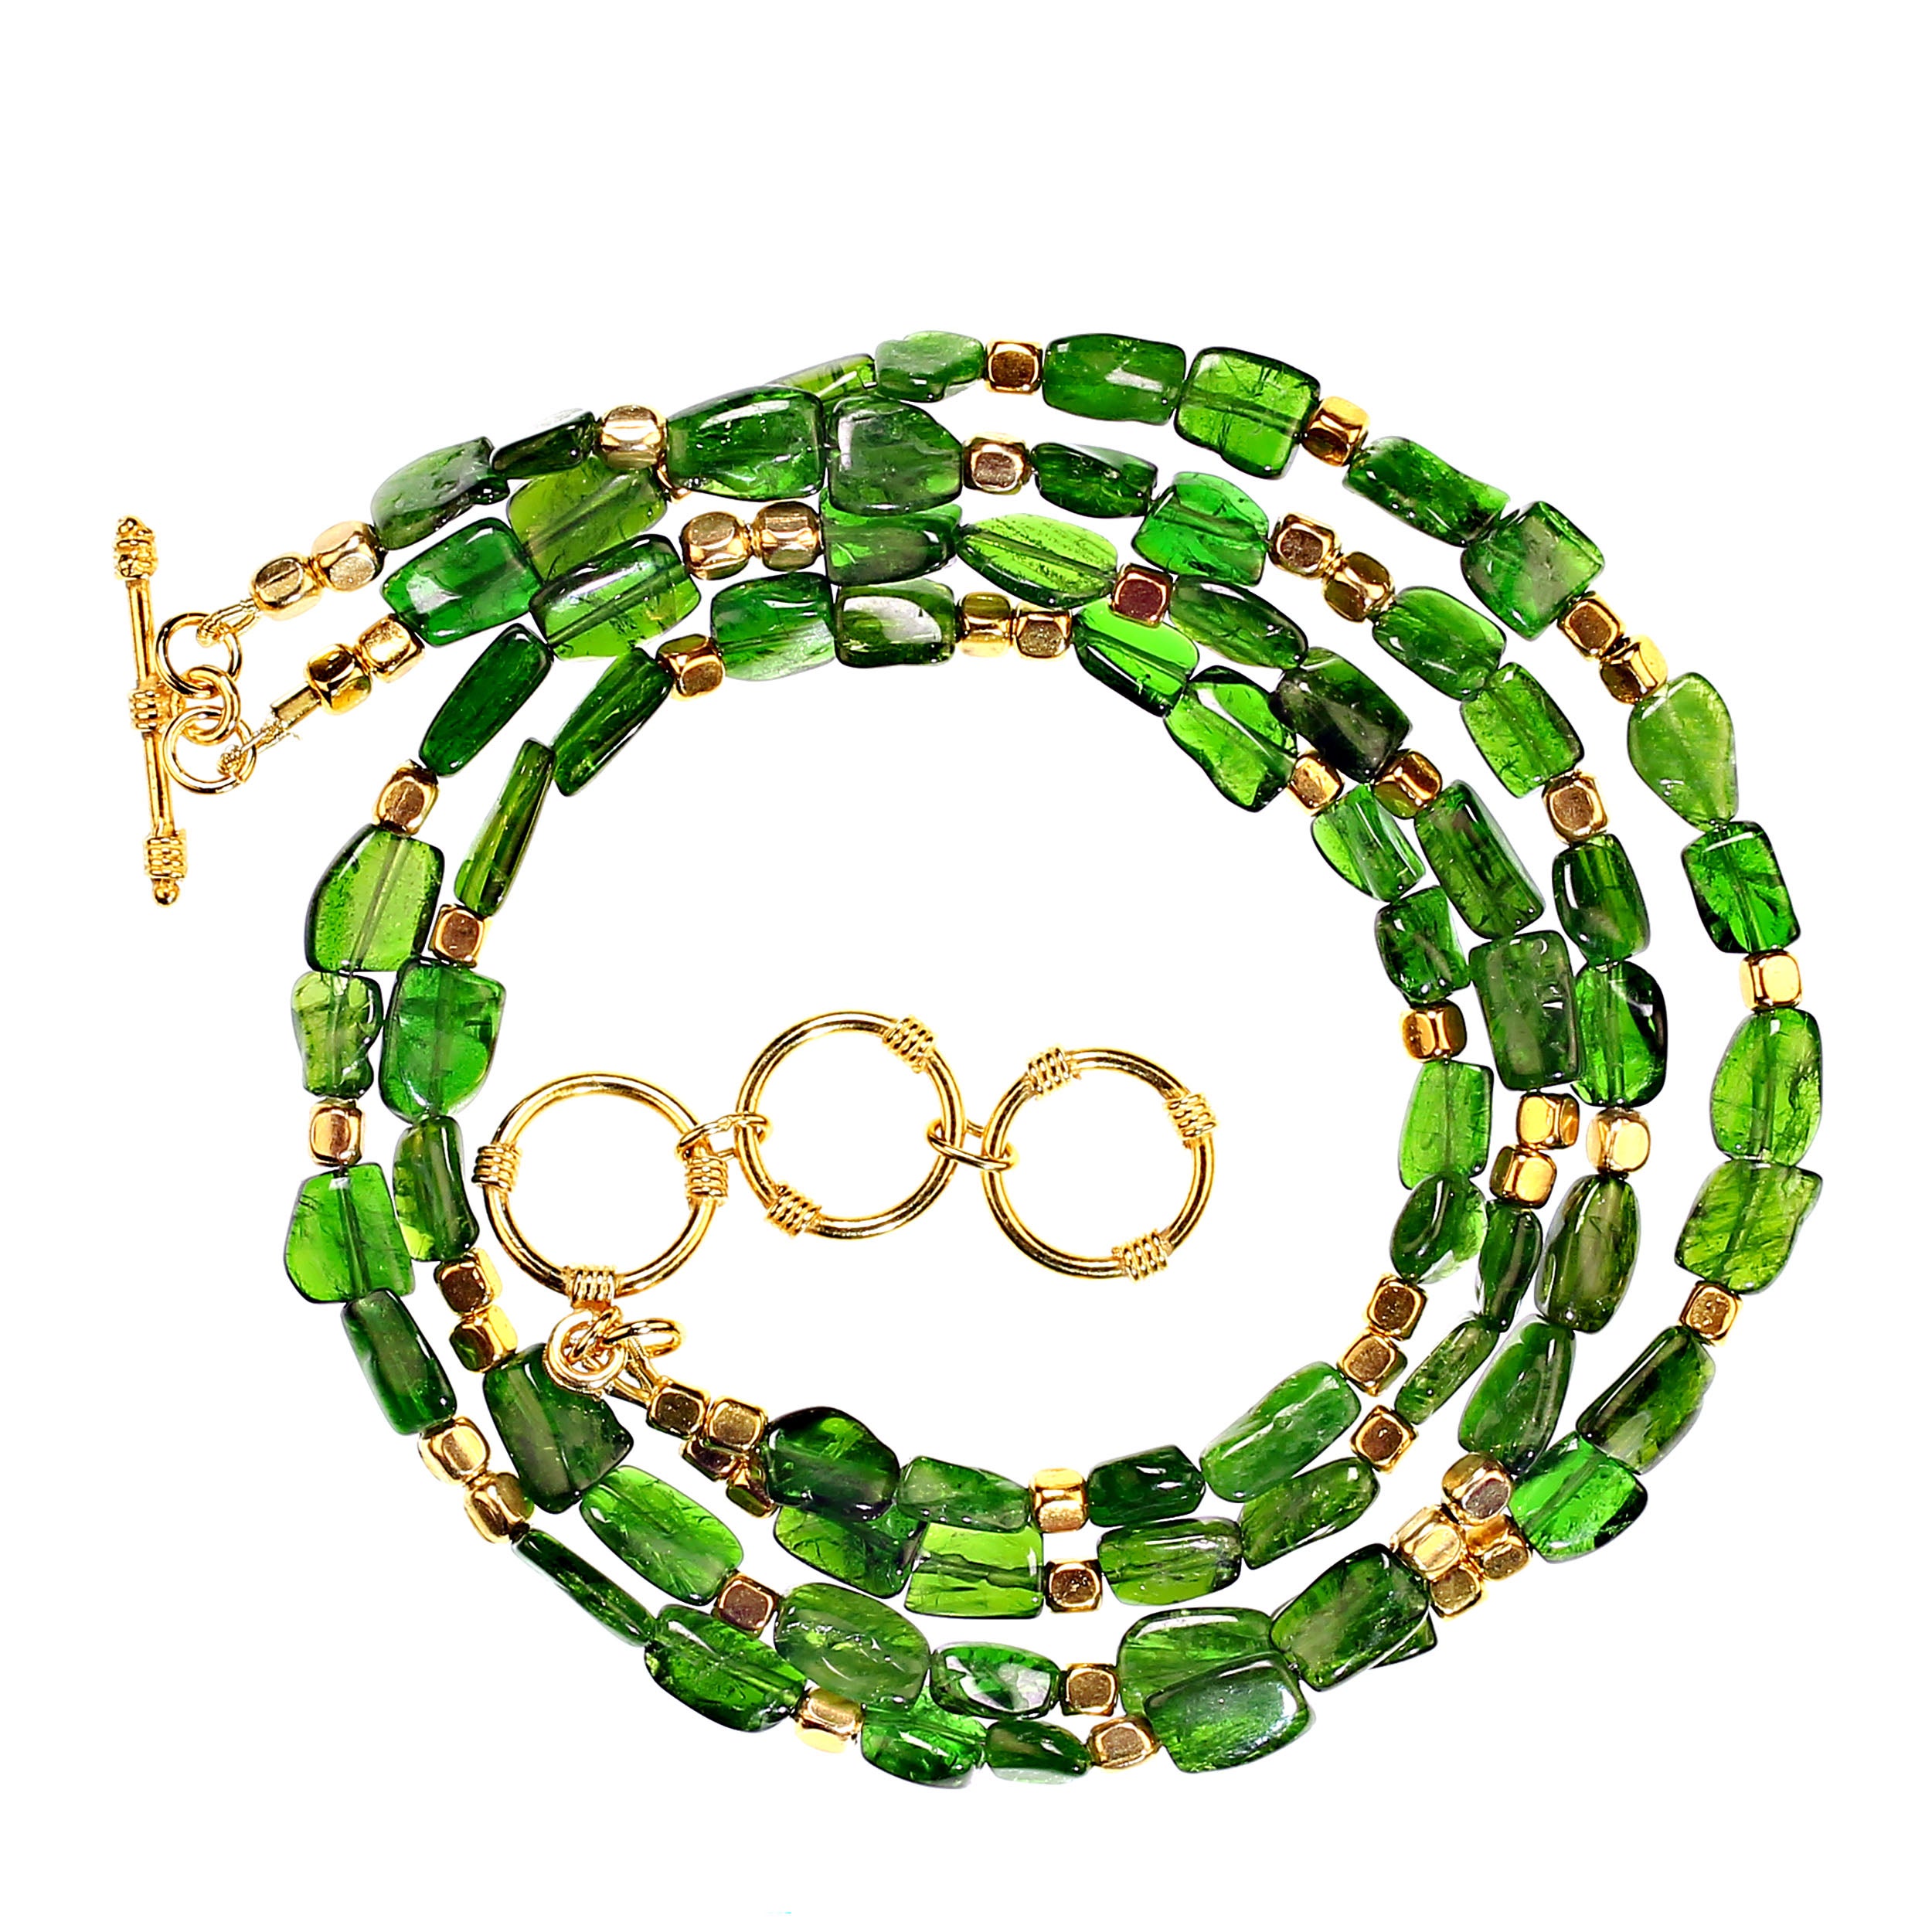 AJD Brilliant Green Chrome Diopside Necklace with Goldy Accents  Great Gift! For Sale